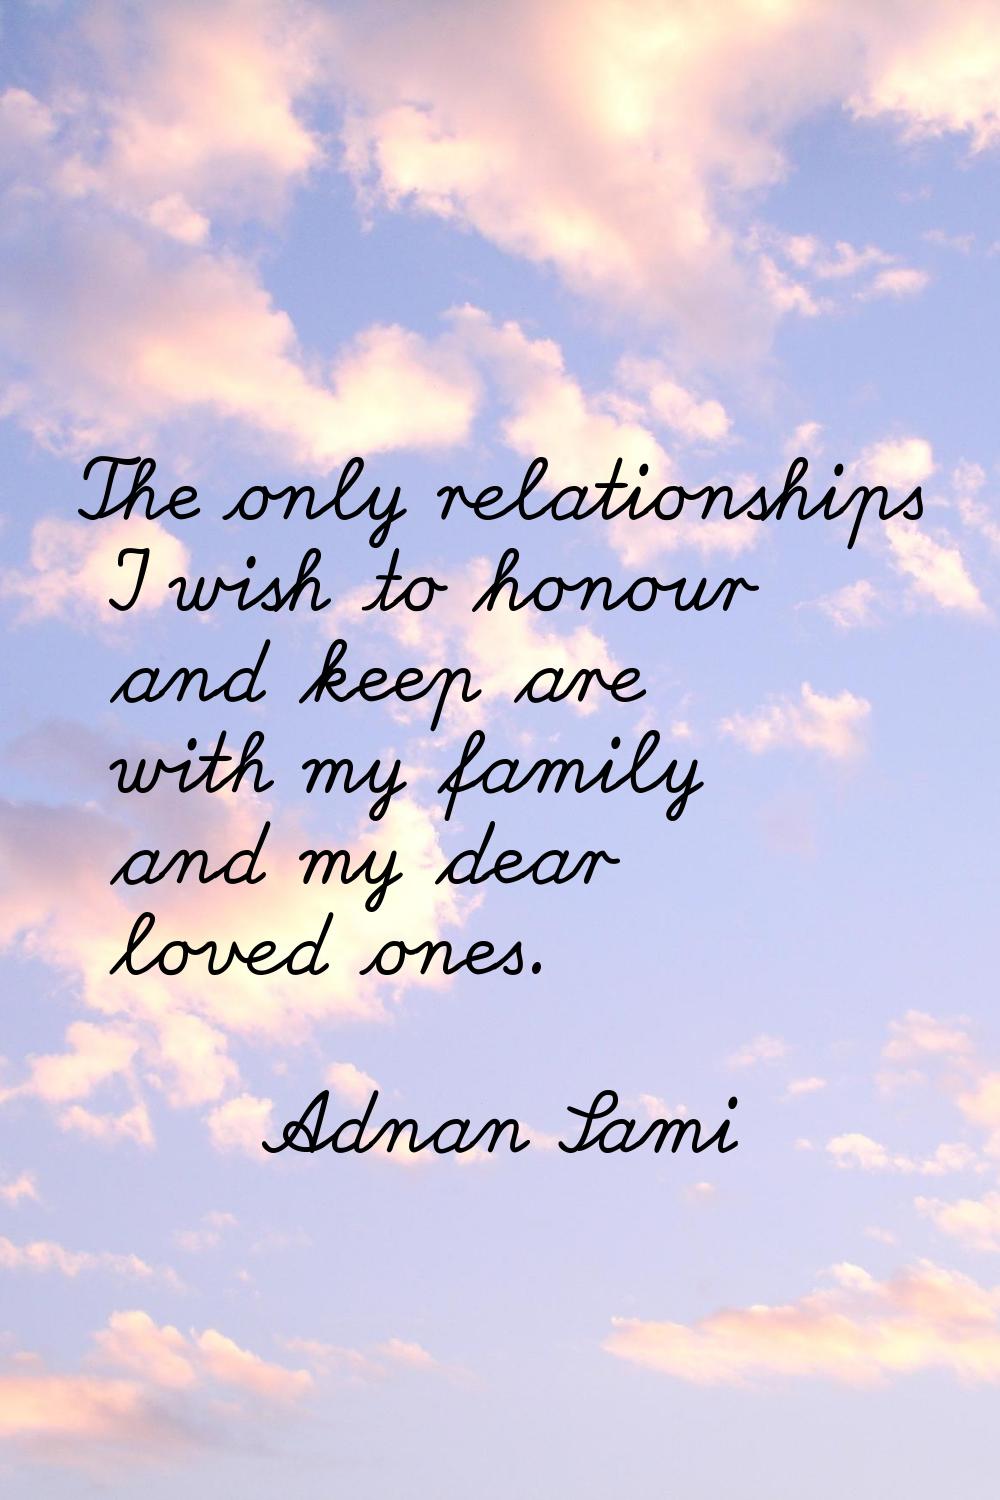 The only relationships I wish to honour and keep are with my family and my dear loved ones.